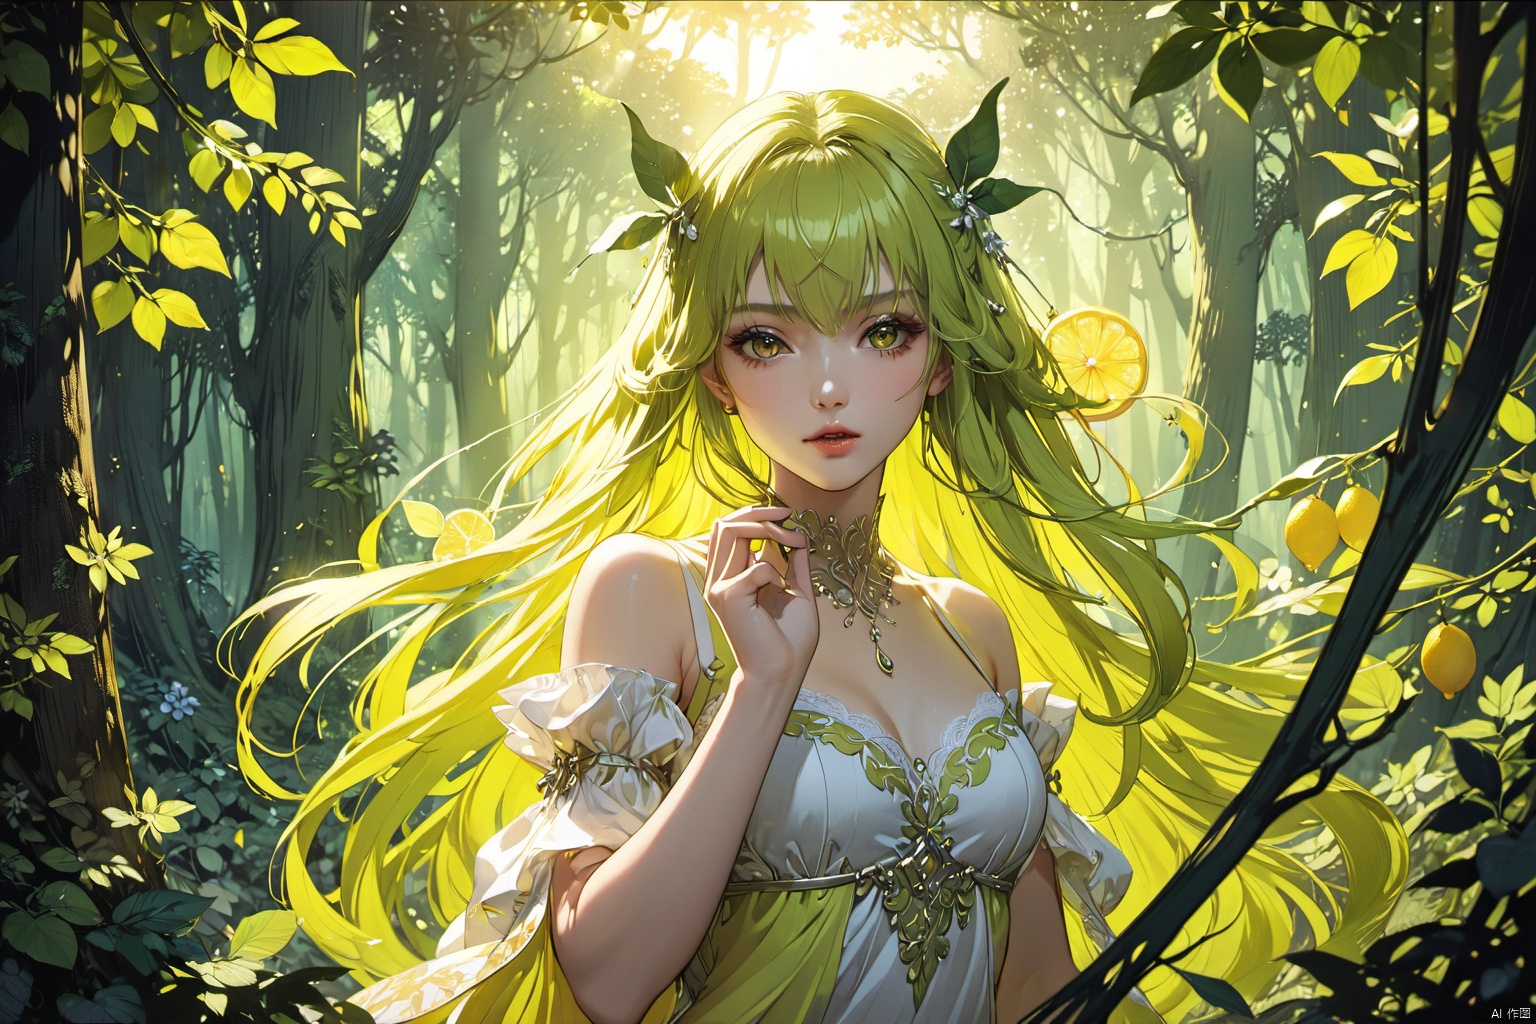  ultra-detailed,(best quality),((masterpiece)),(highres),original,extremely detailed 8K wallpaper,(an extremely delicate and beautiful),anime,detail face and eyes, perfect hands,  (close up , solo),   Lemon theme, 

An anime illustration of a succubus with flowing long hair, set in a forest with cinematic lighting effects that create striking contrasts between light and shadow.